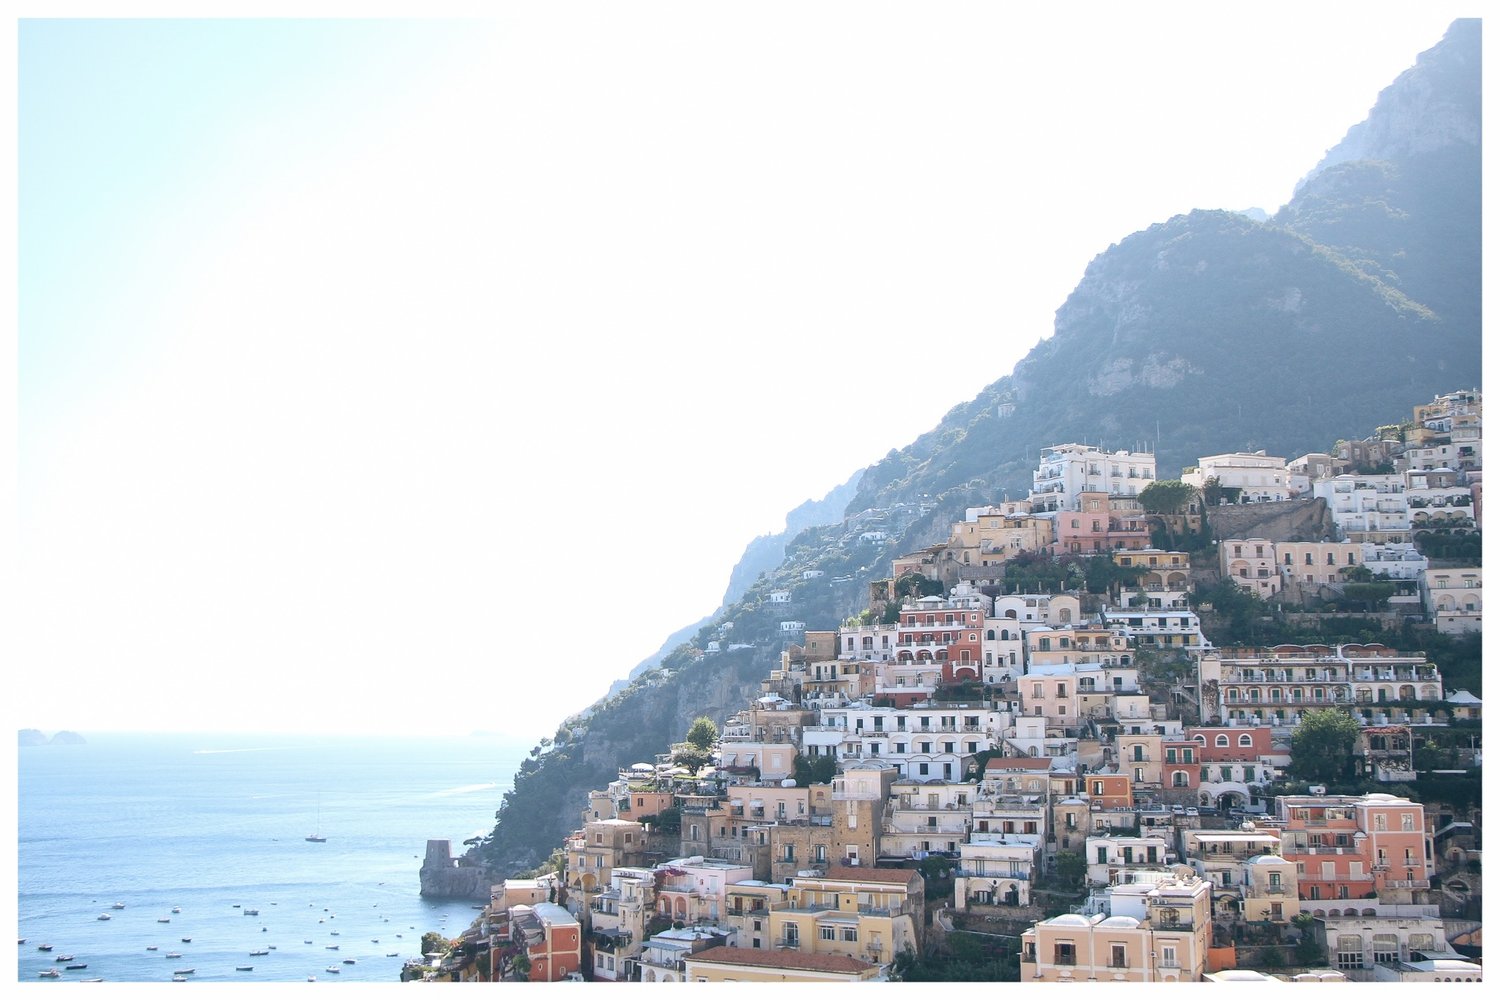 The Ultimate Guide to Visiting Positano, Italy - Destinations